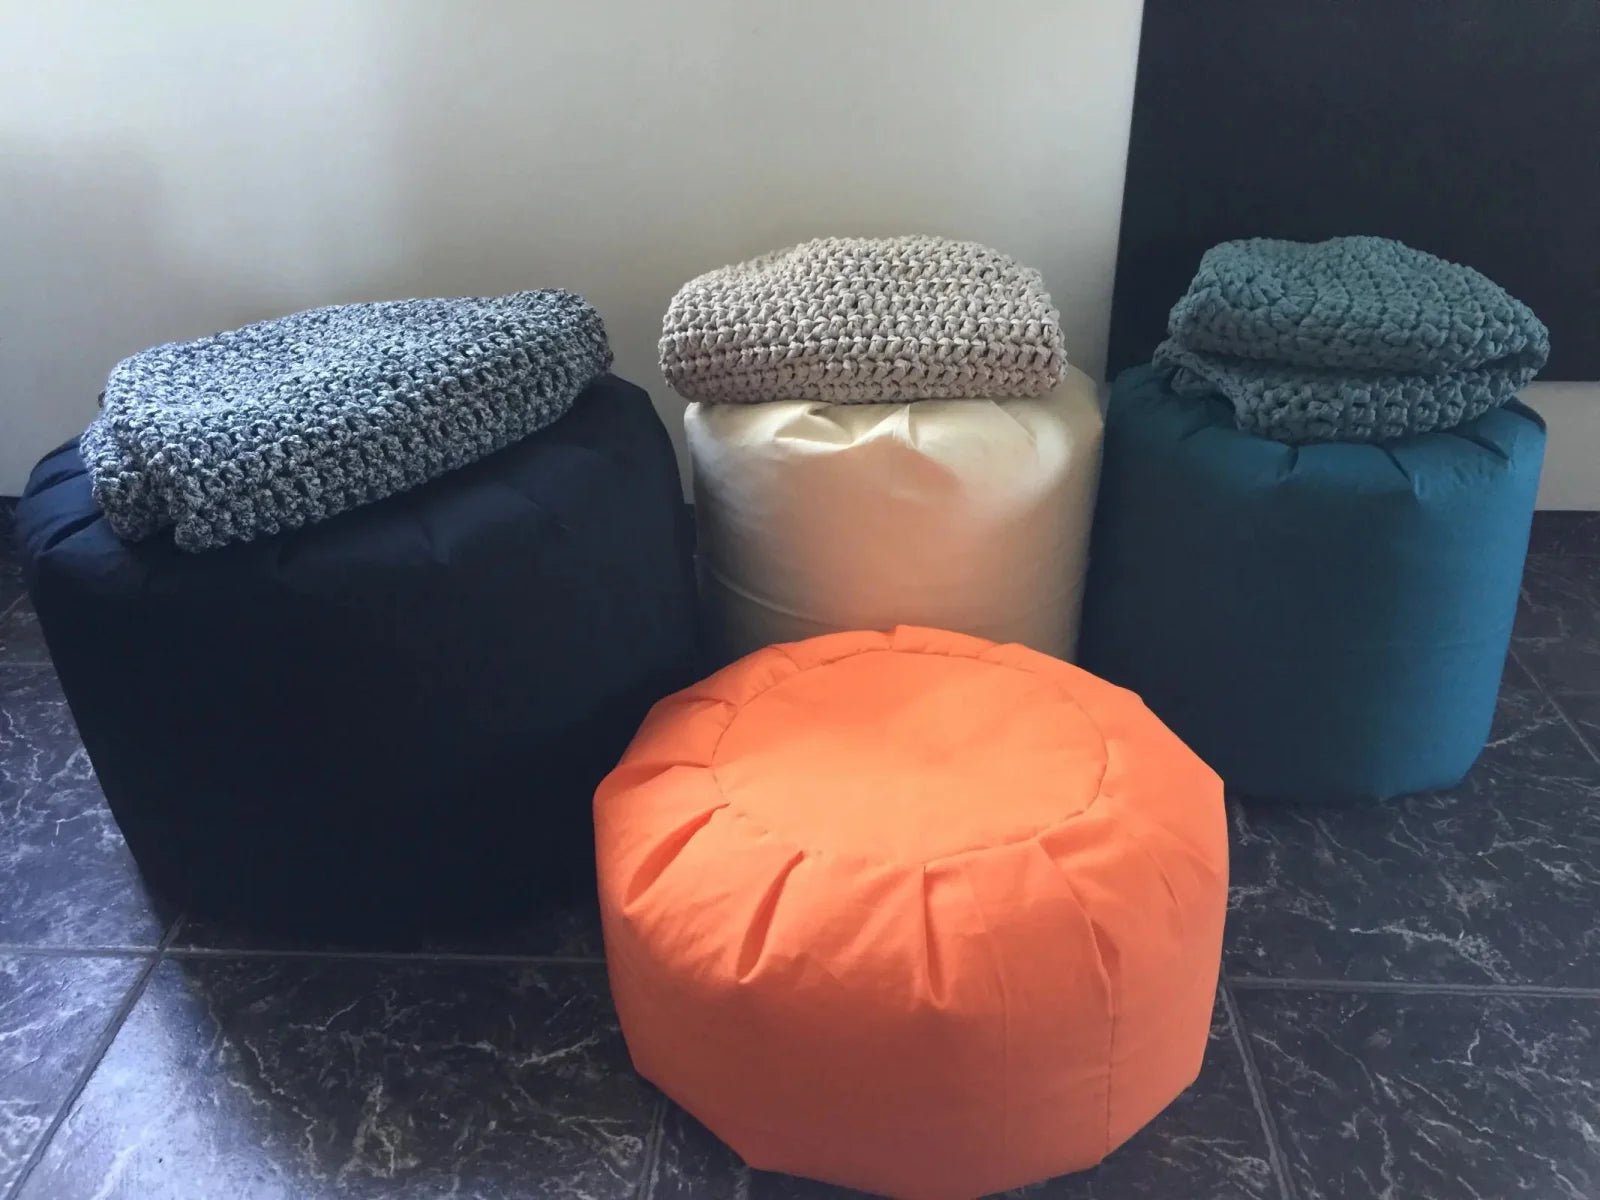 Round Knitted Pouffe Ottoman - Chartreuse - Looping Home